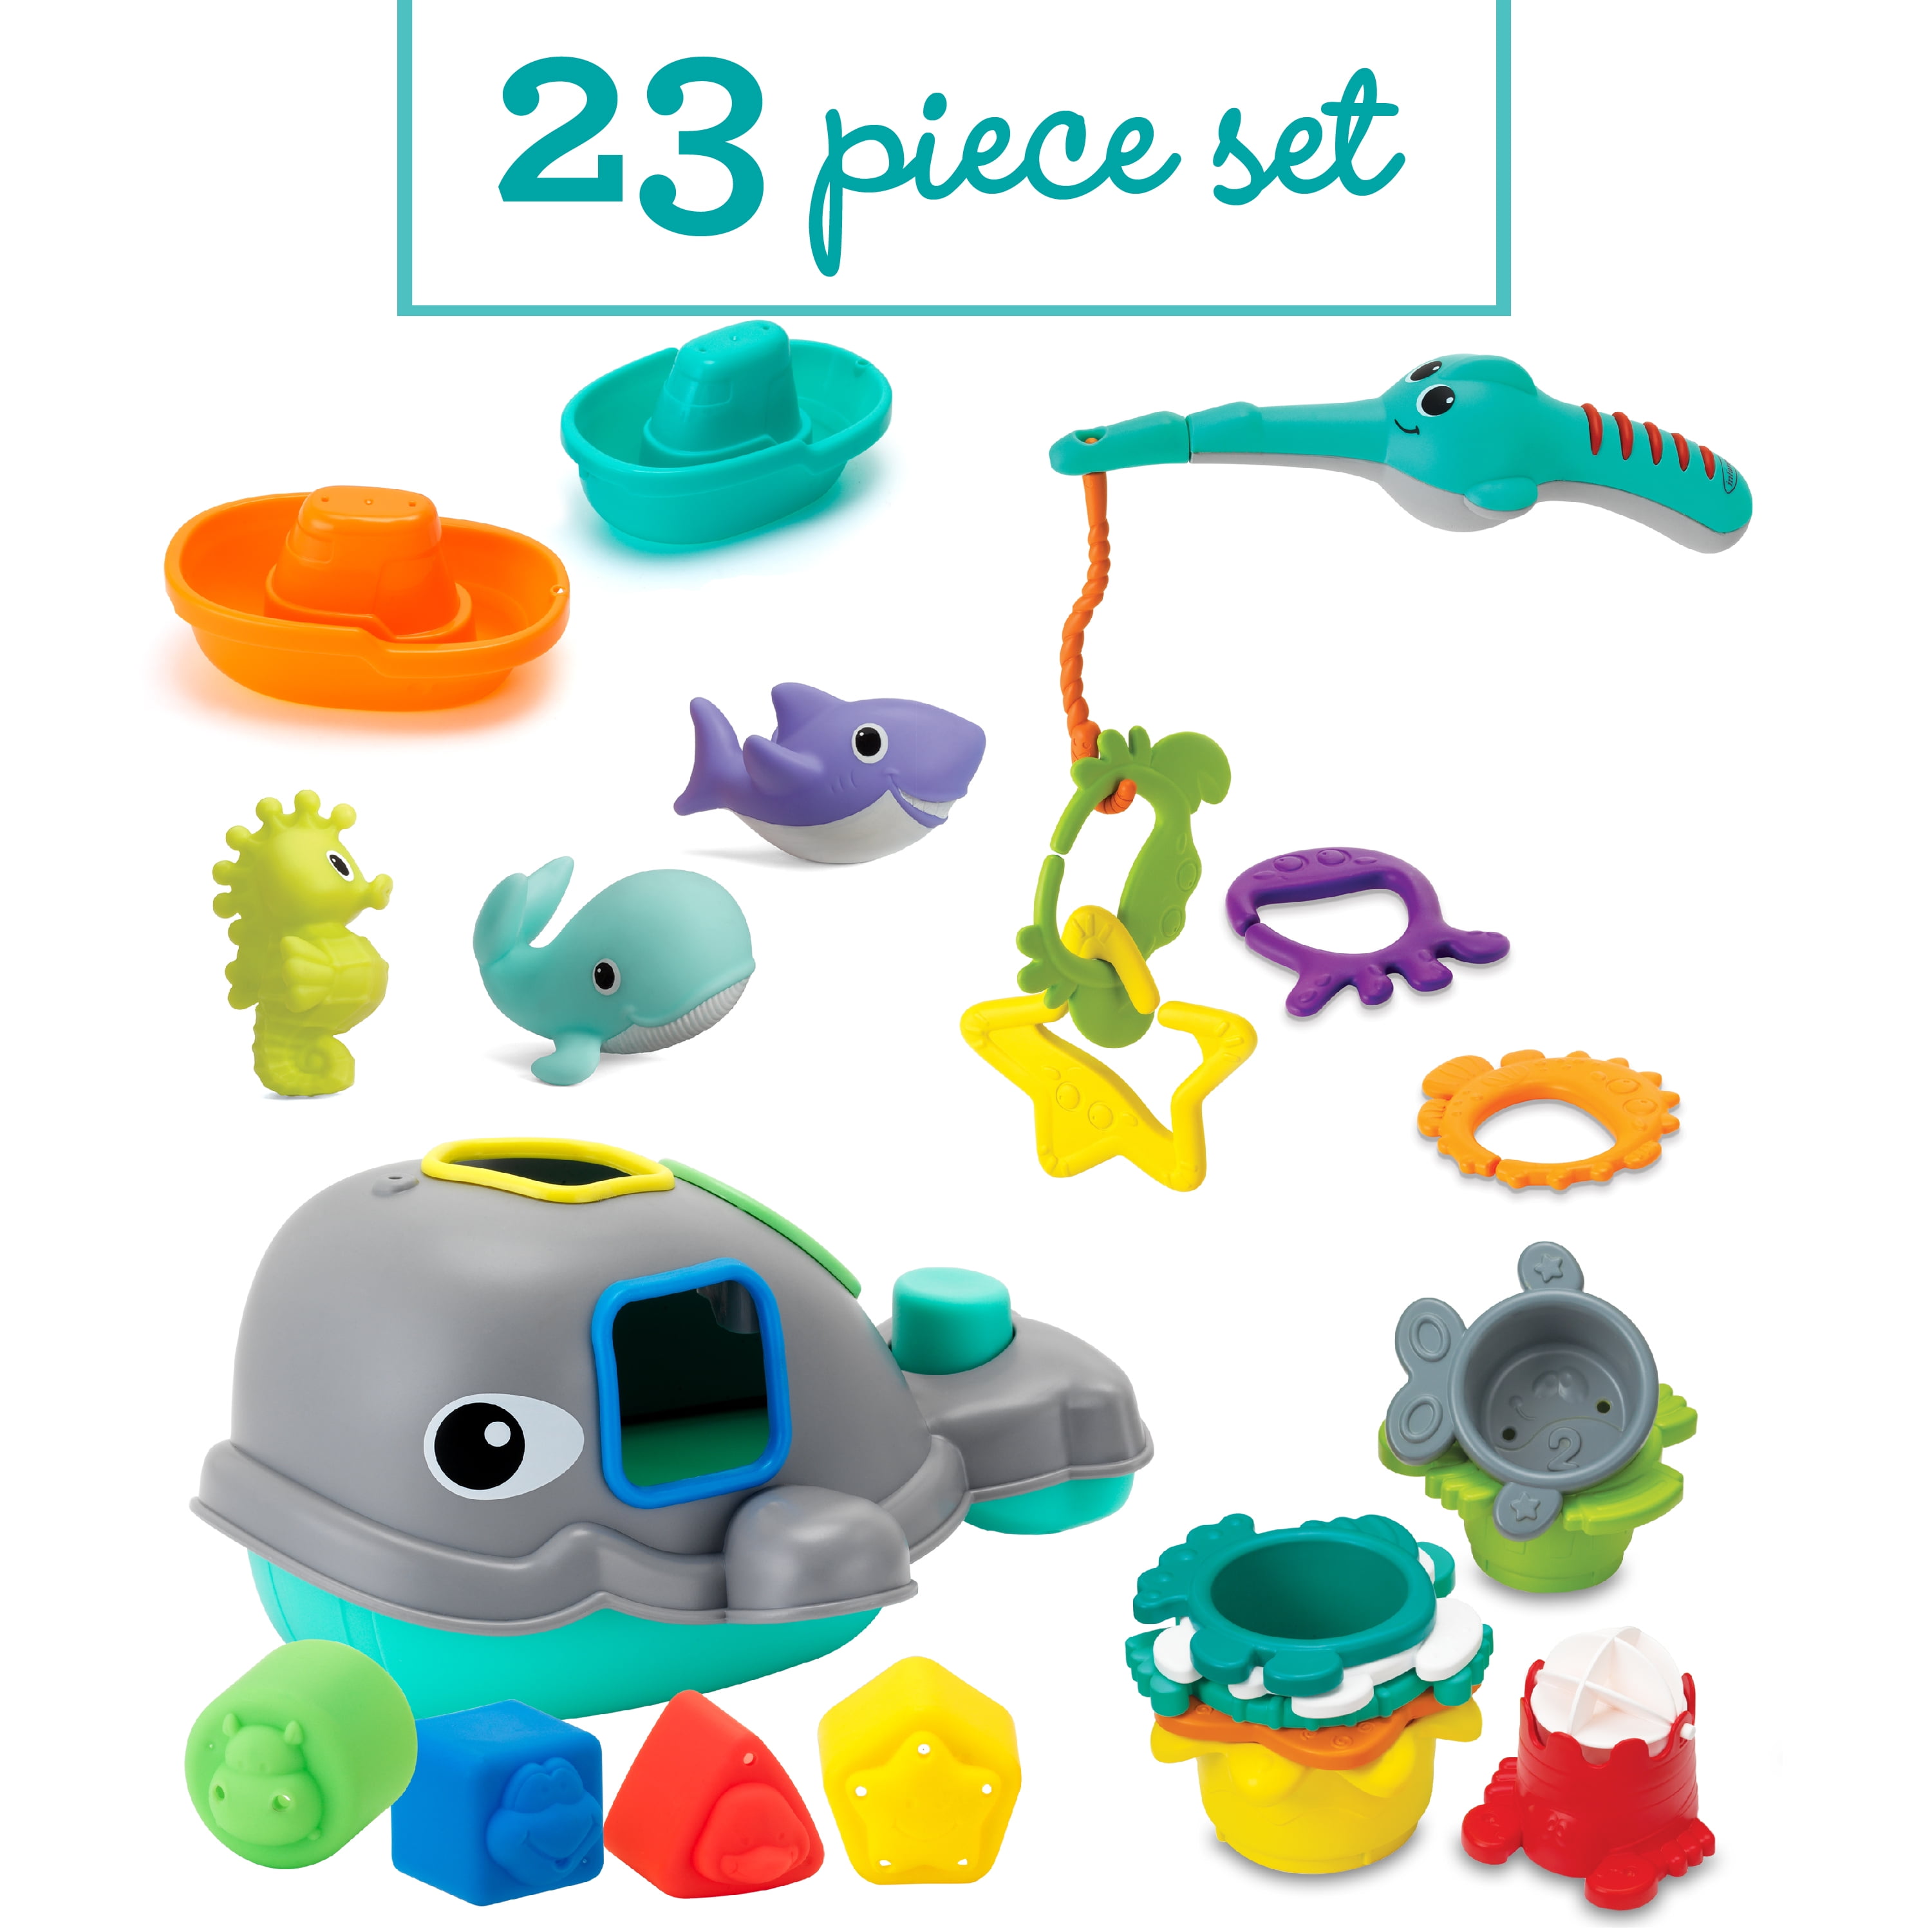 25 Pcs Fishing Game Toys Set Beach Bath Toys Floating Fish Play Sets Sand Water 